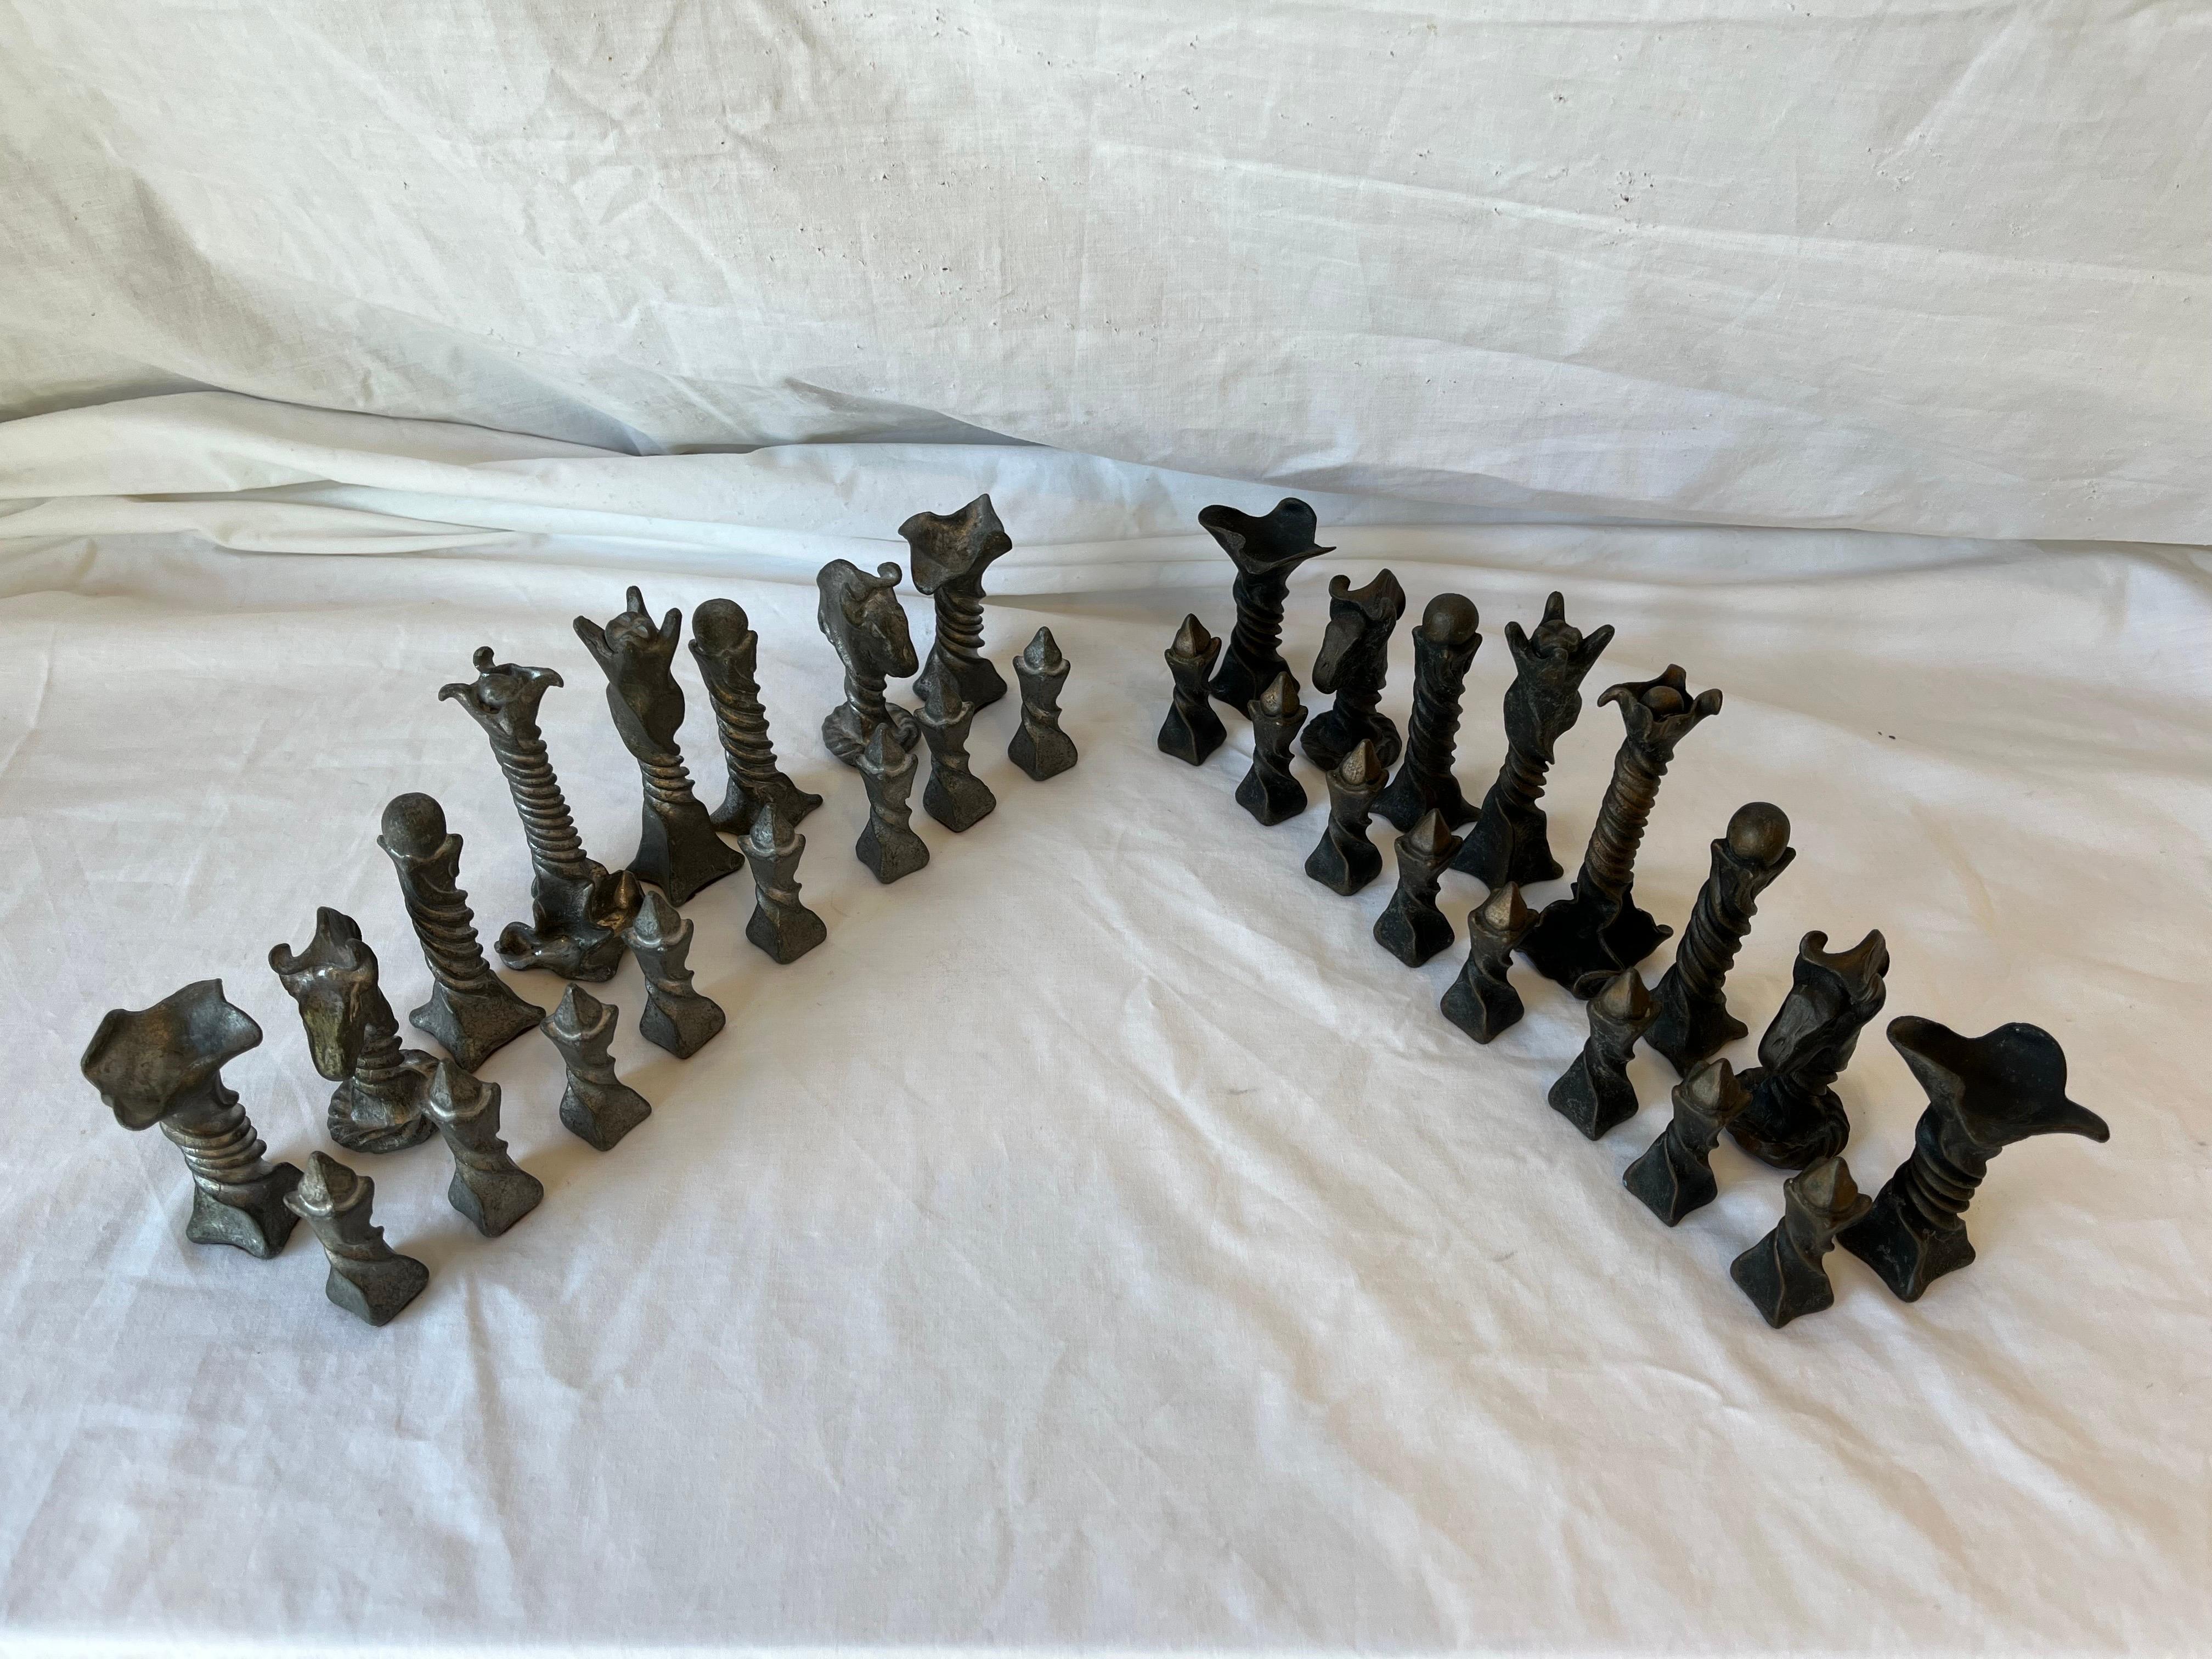 Vintage Brutalist Style Cast Metal Chess Set with Twisted and Flanged Design 15